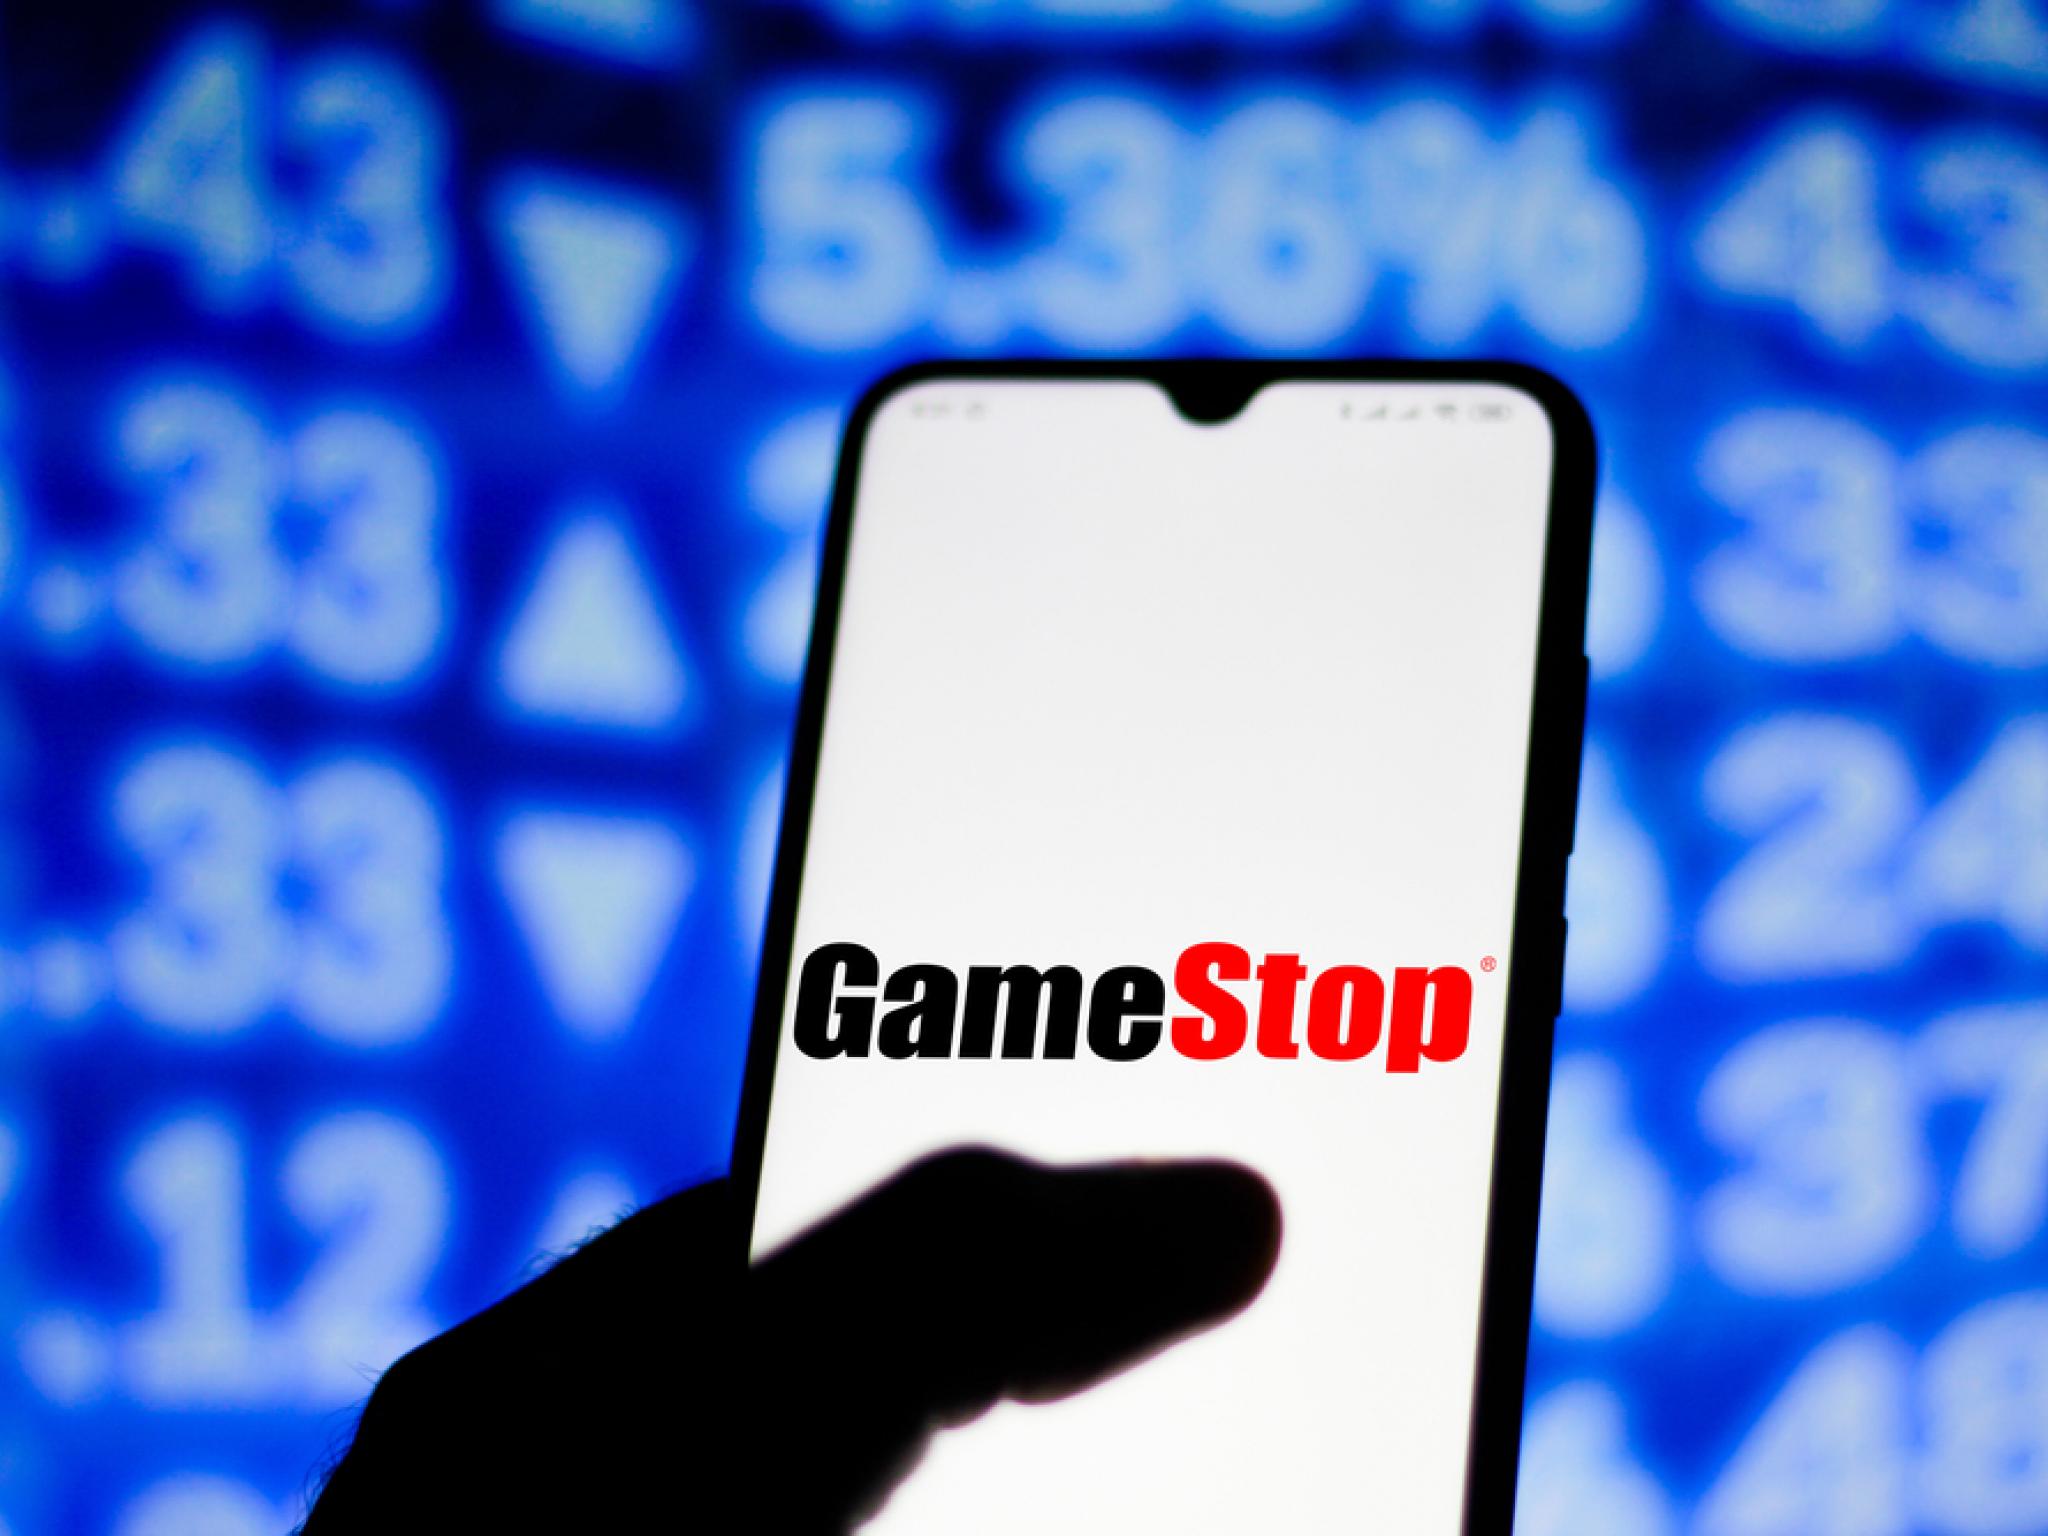  why-is-gamestop-stock-crashing-premarket-after-early-gains-corrected 